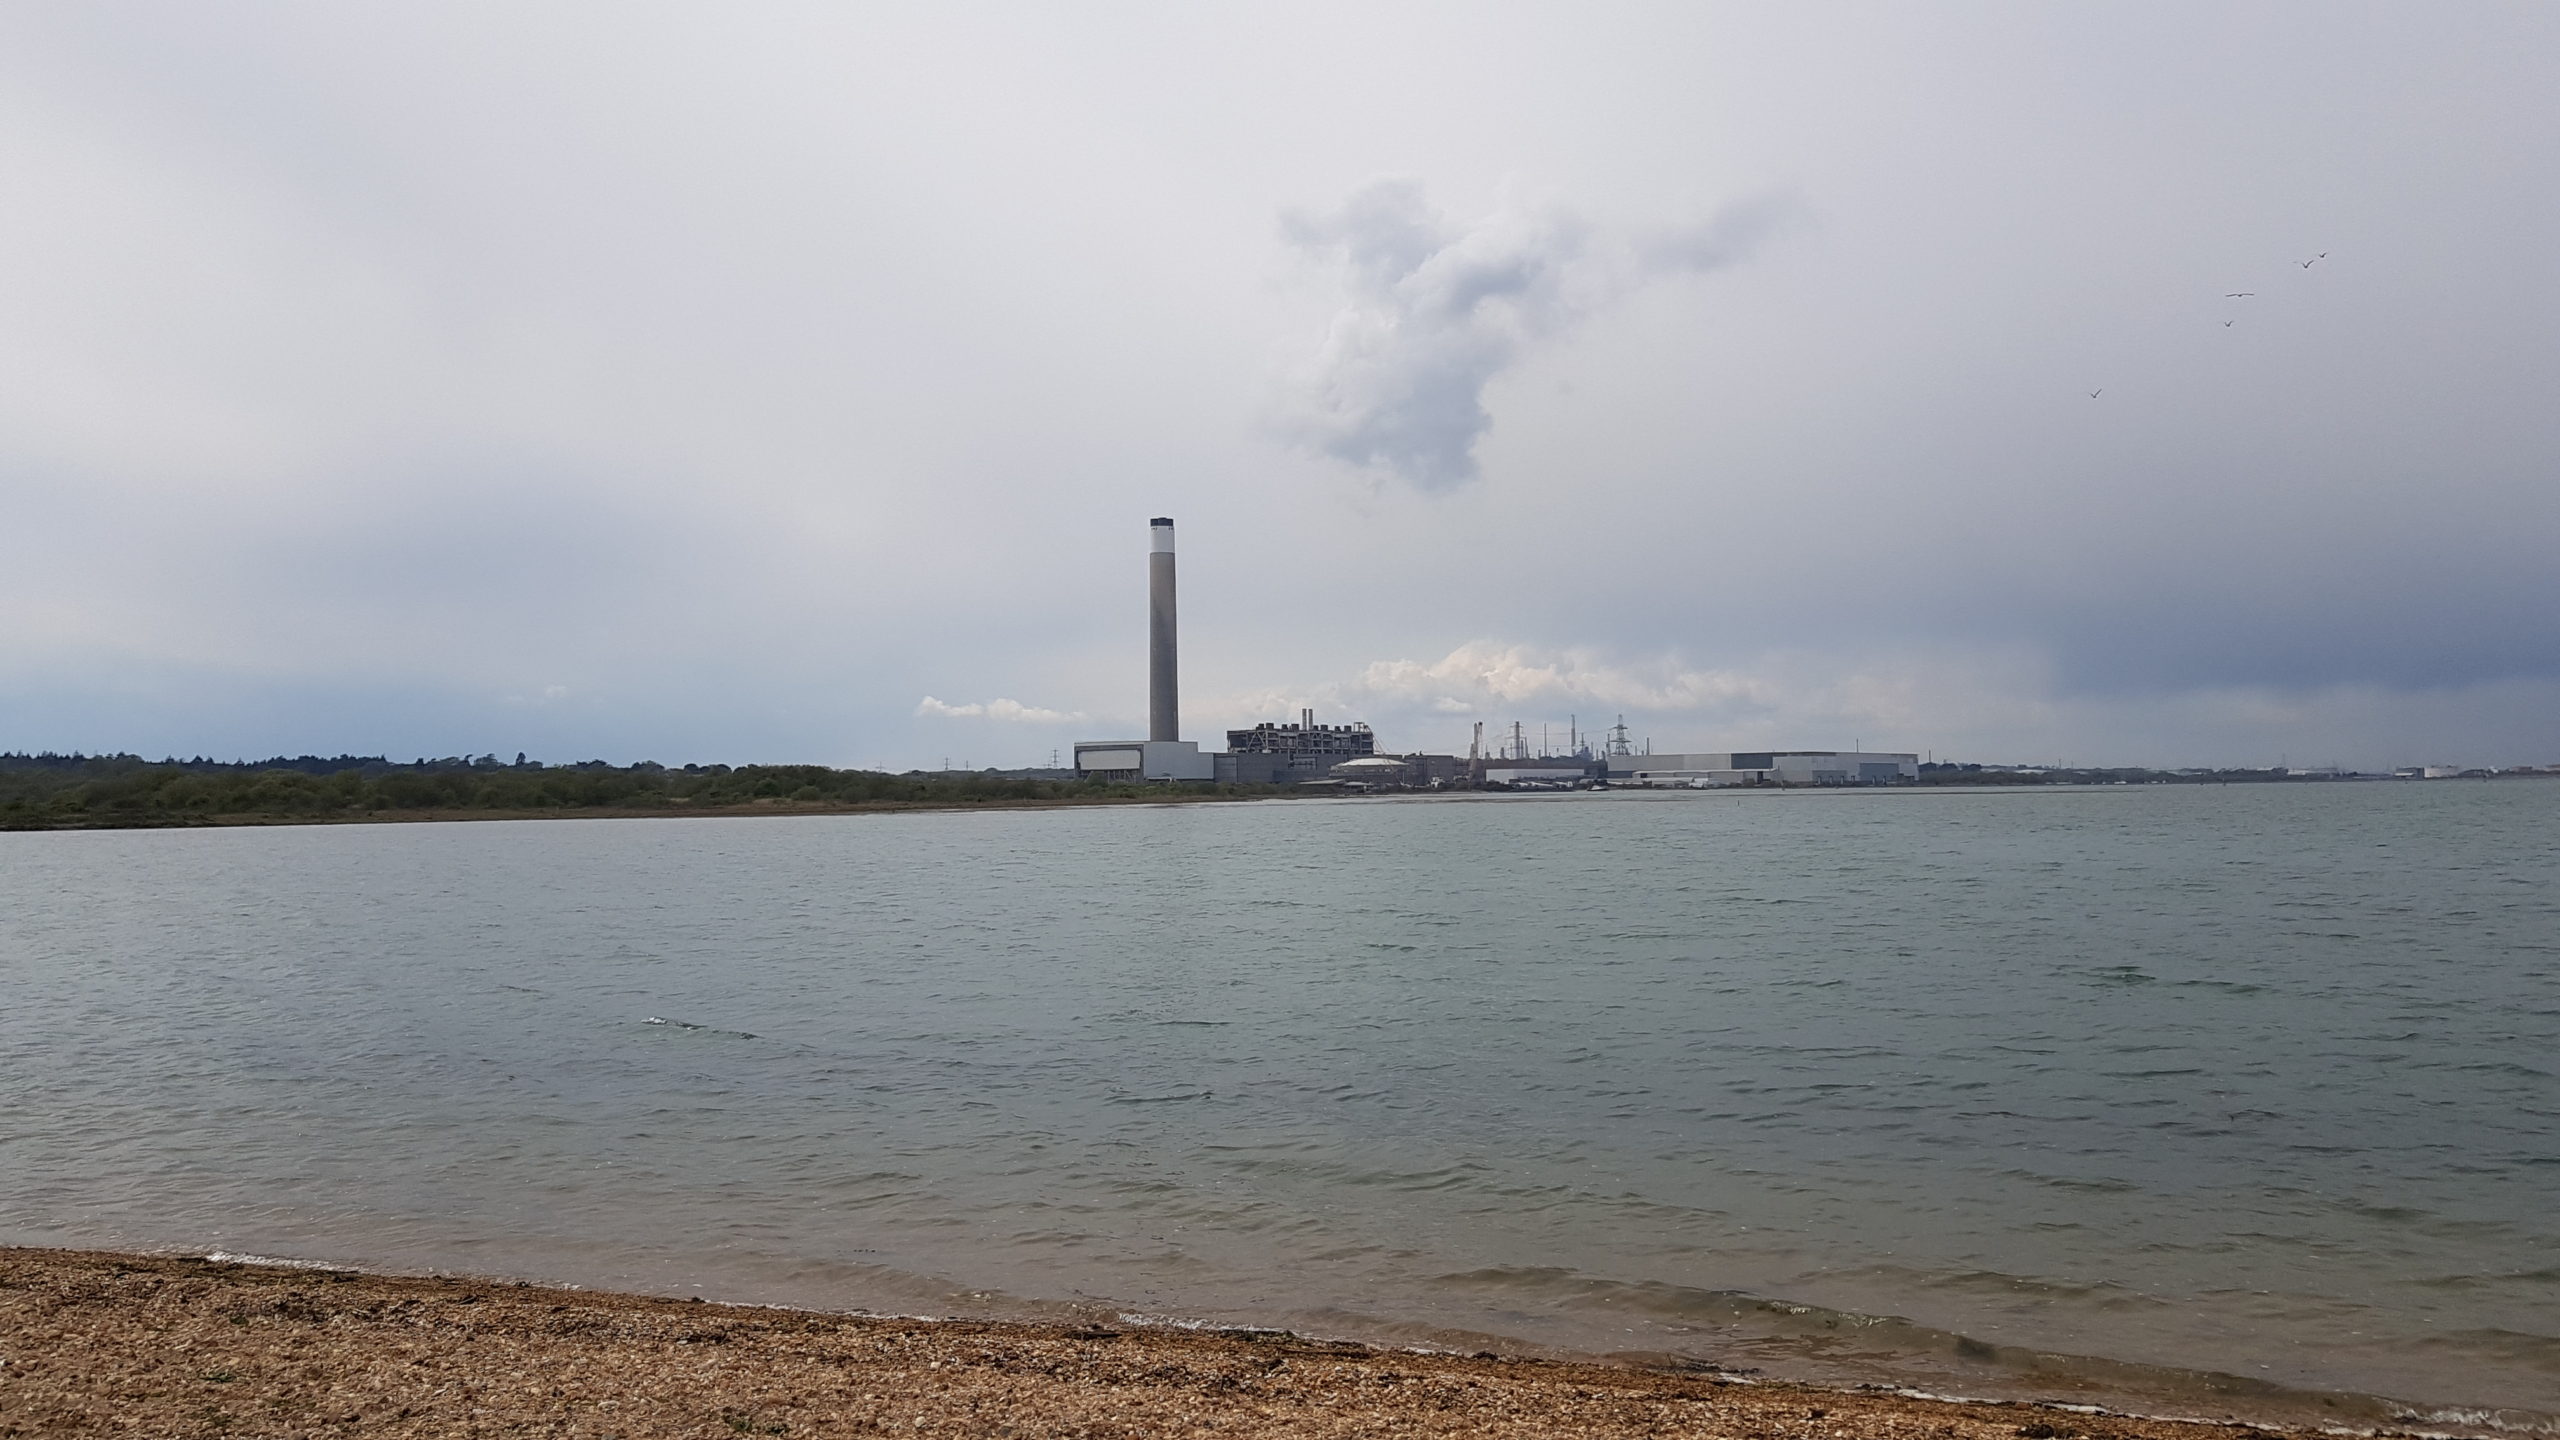 Fat Naked Beach Amateurs - How History Remembers: A Fawley Power Station Play - David Lane